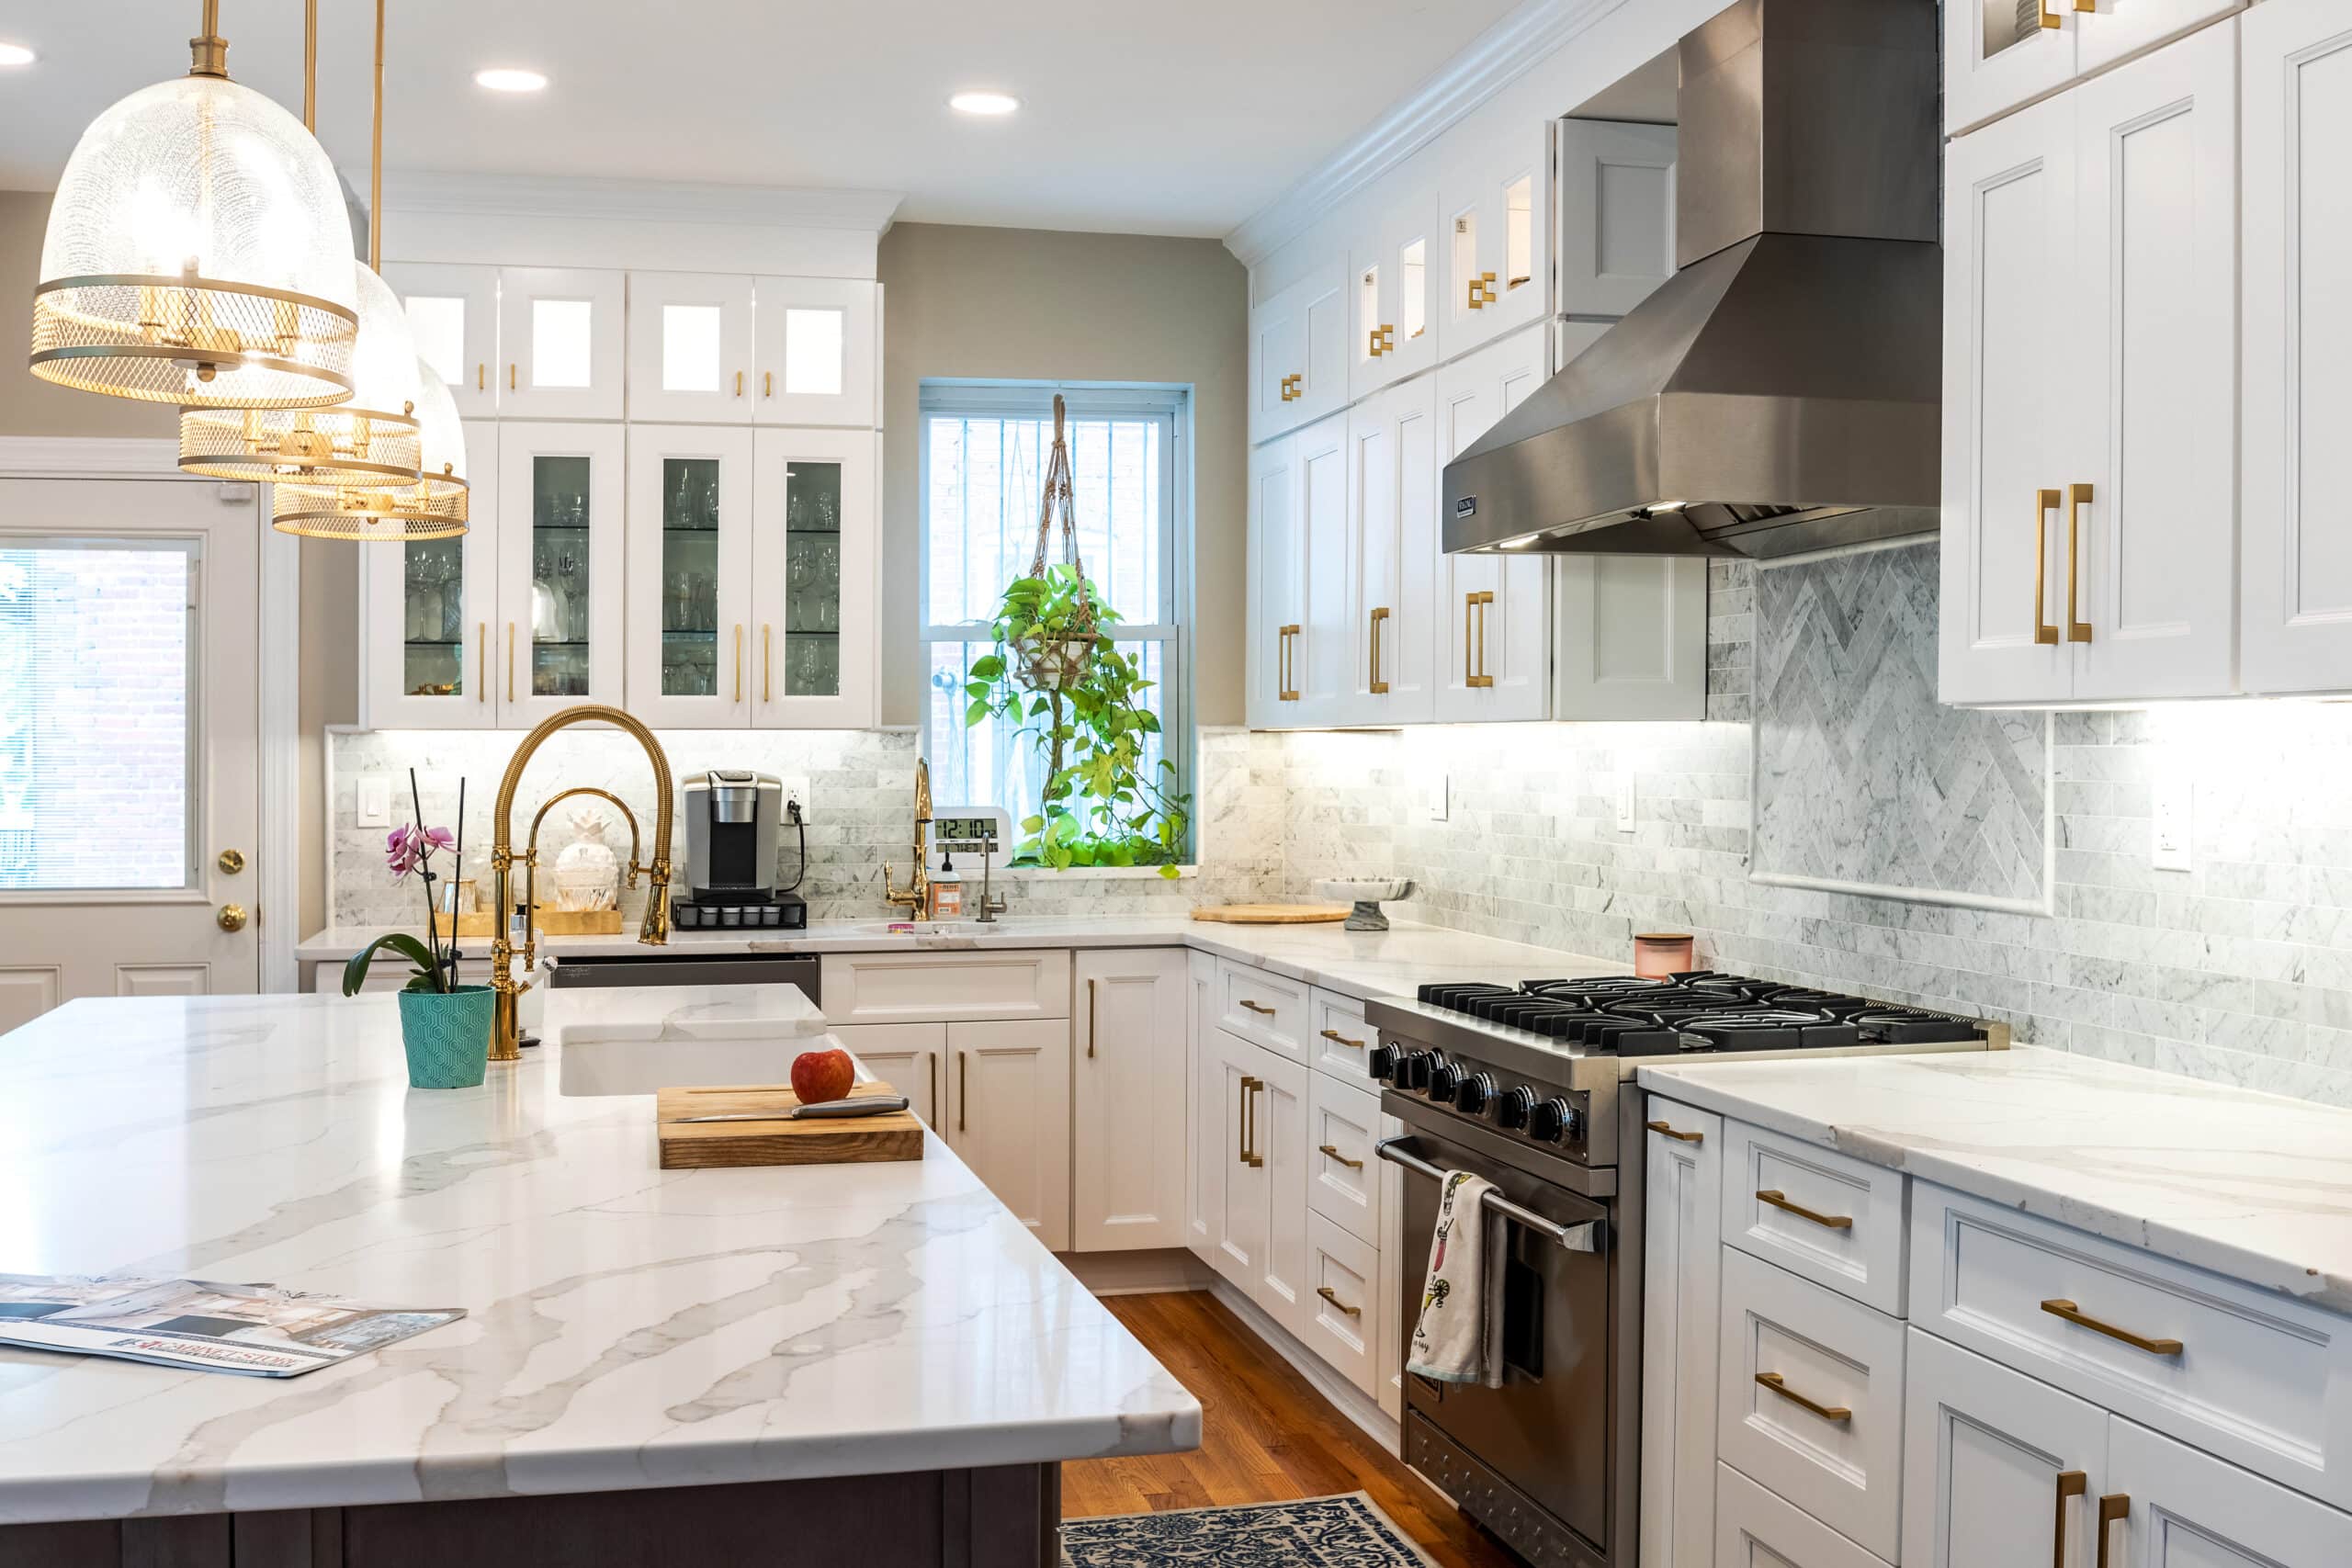 White kitchen cabinets with kitchen island and a sink